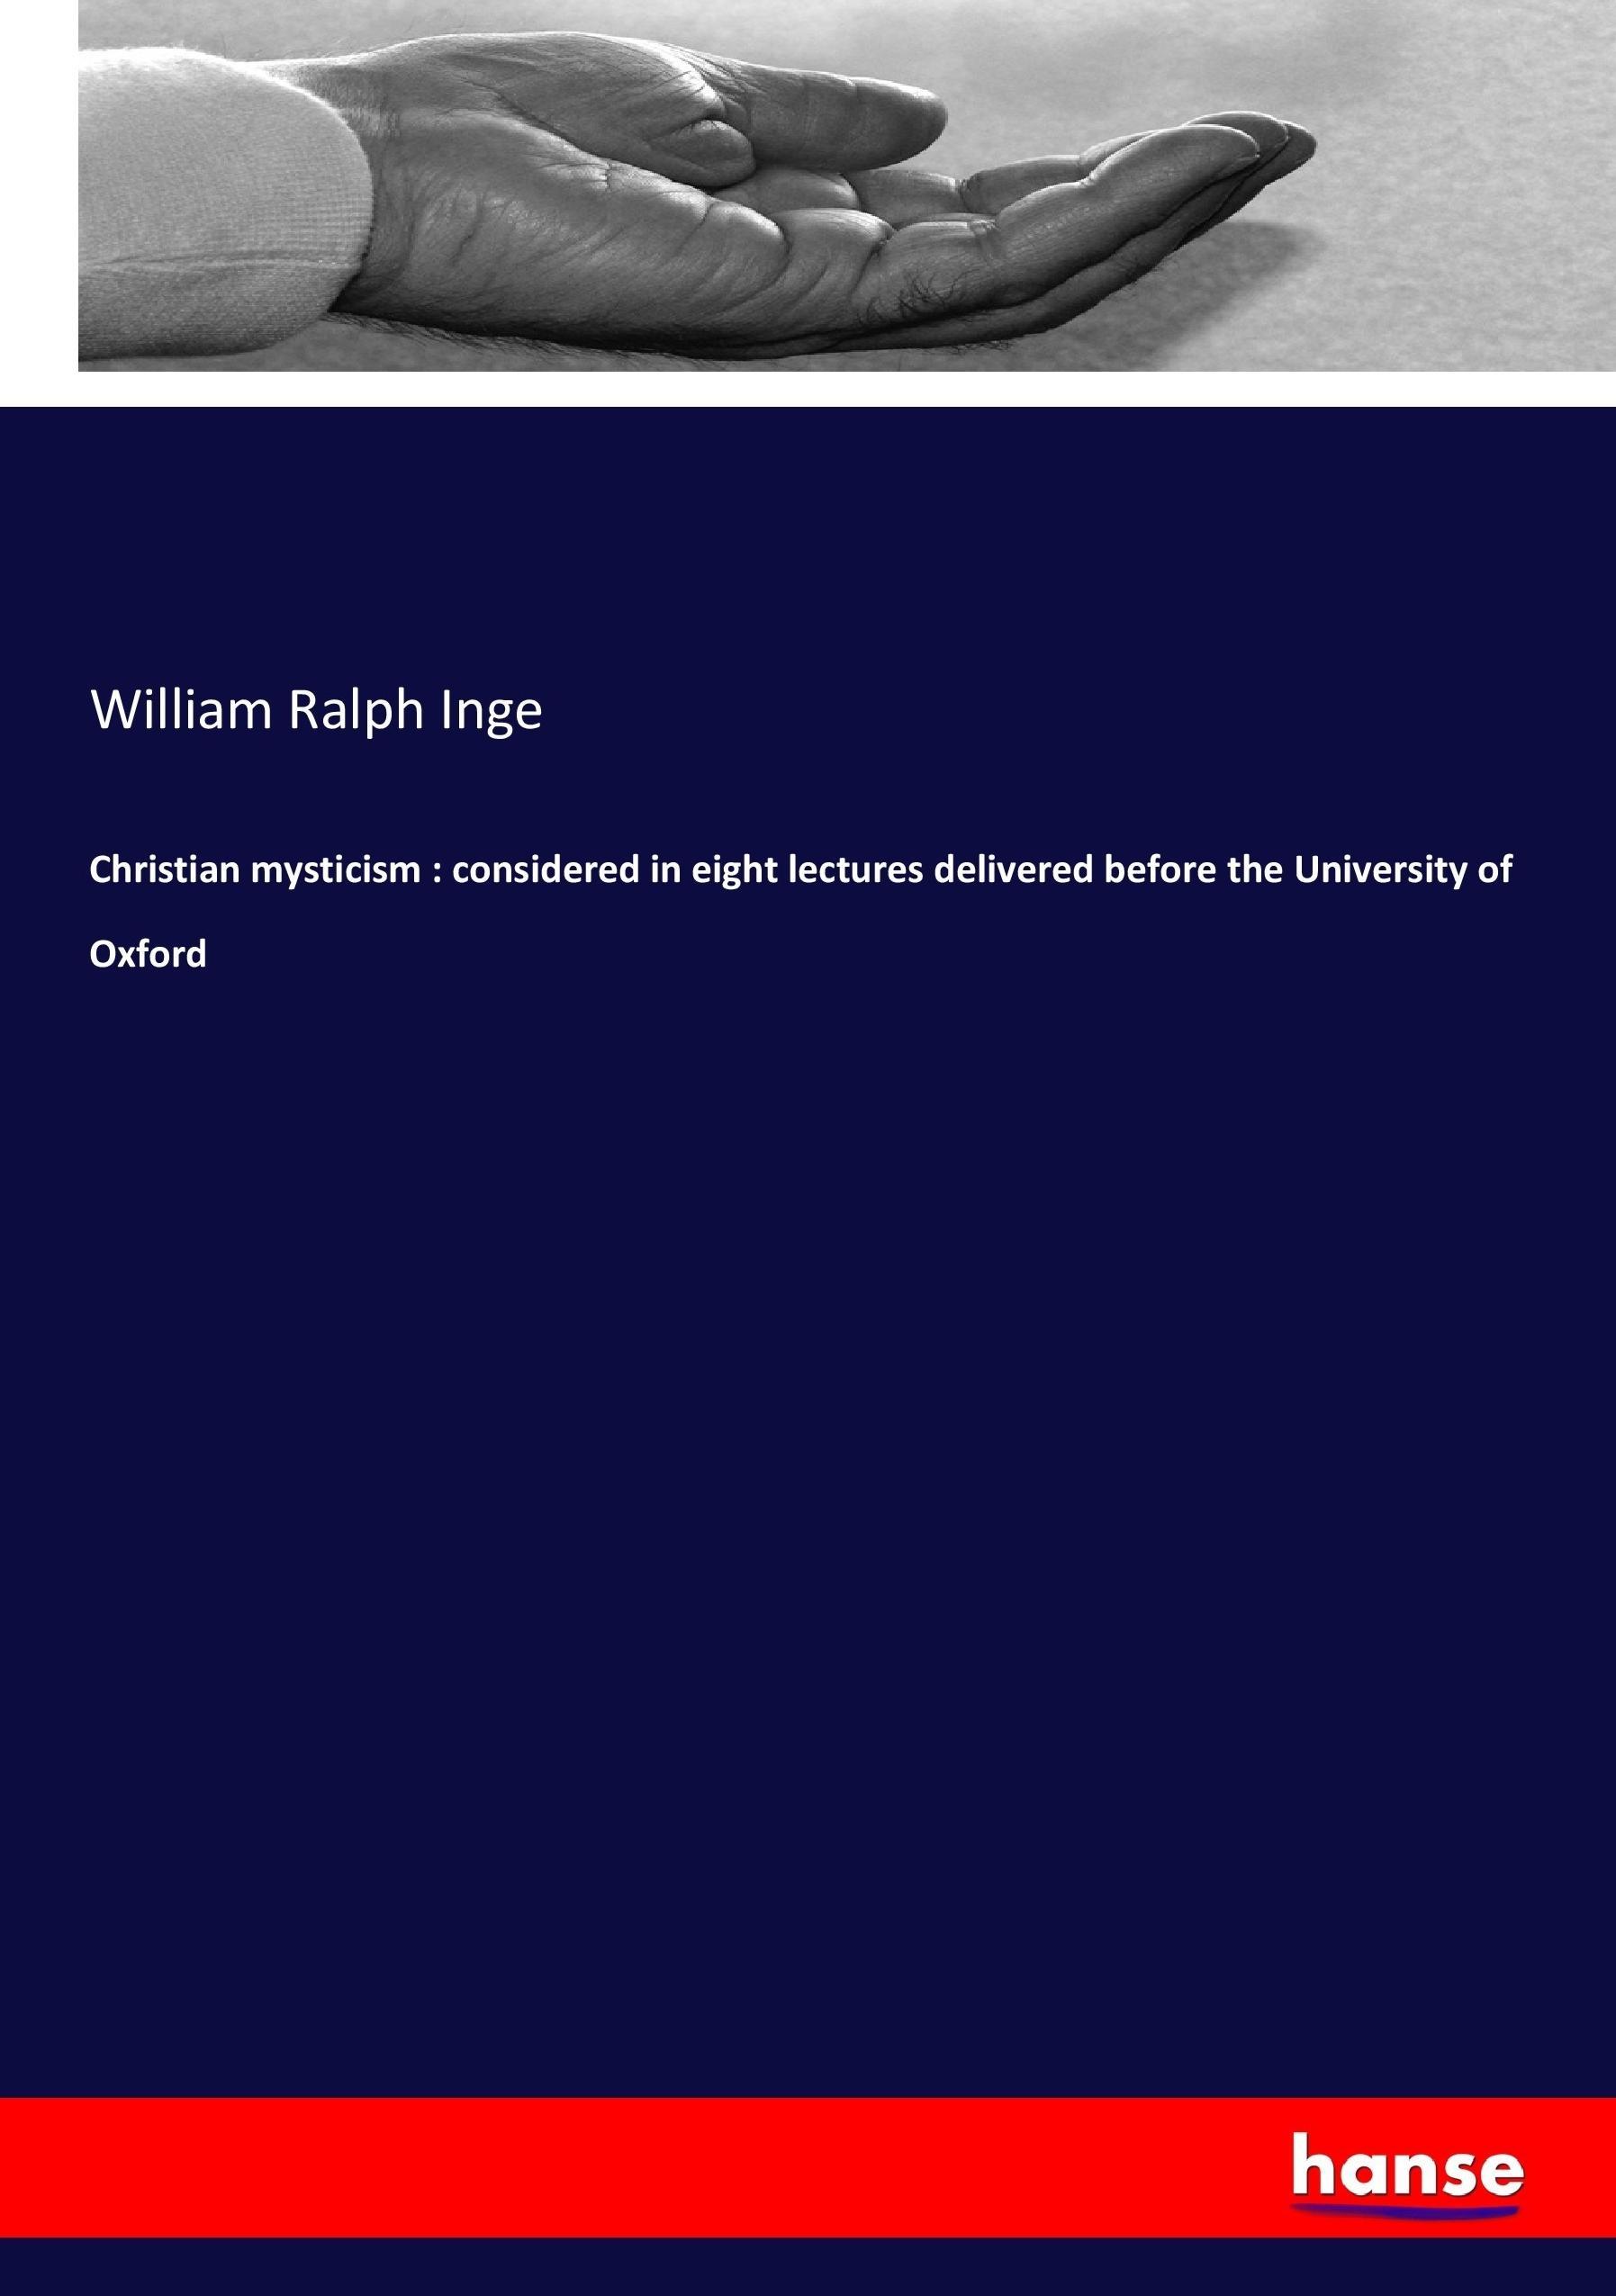 Christian mysticism : considered in eight lectures delivered before the University of Oxford - Inge, William Ralph